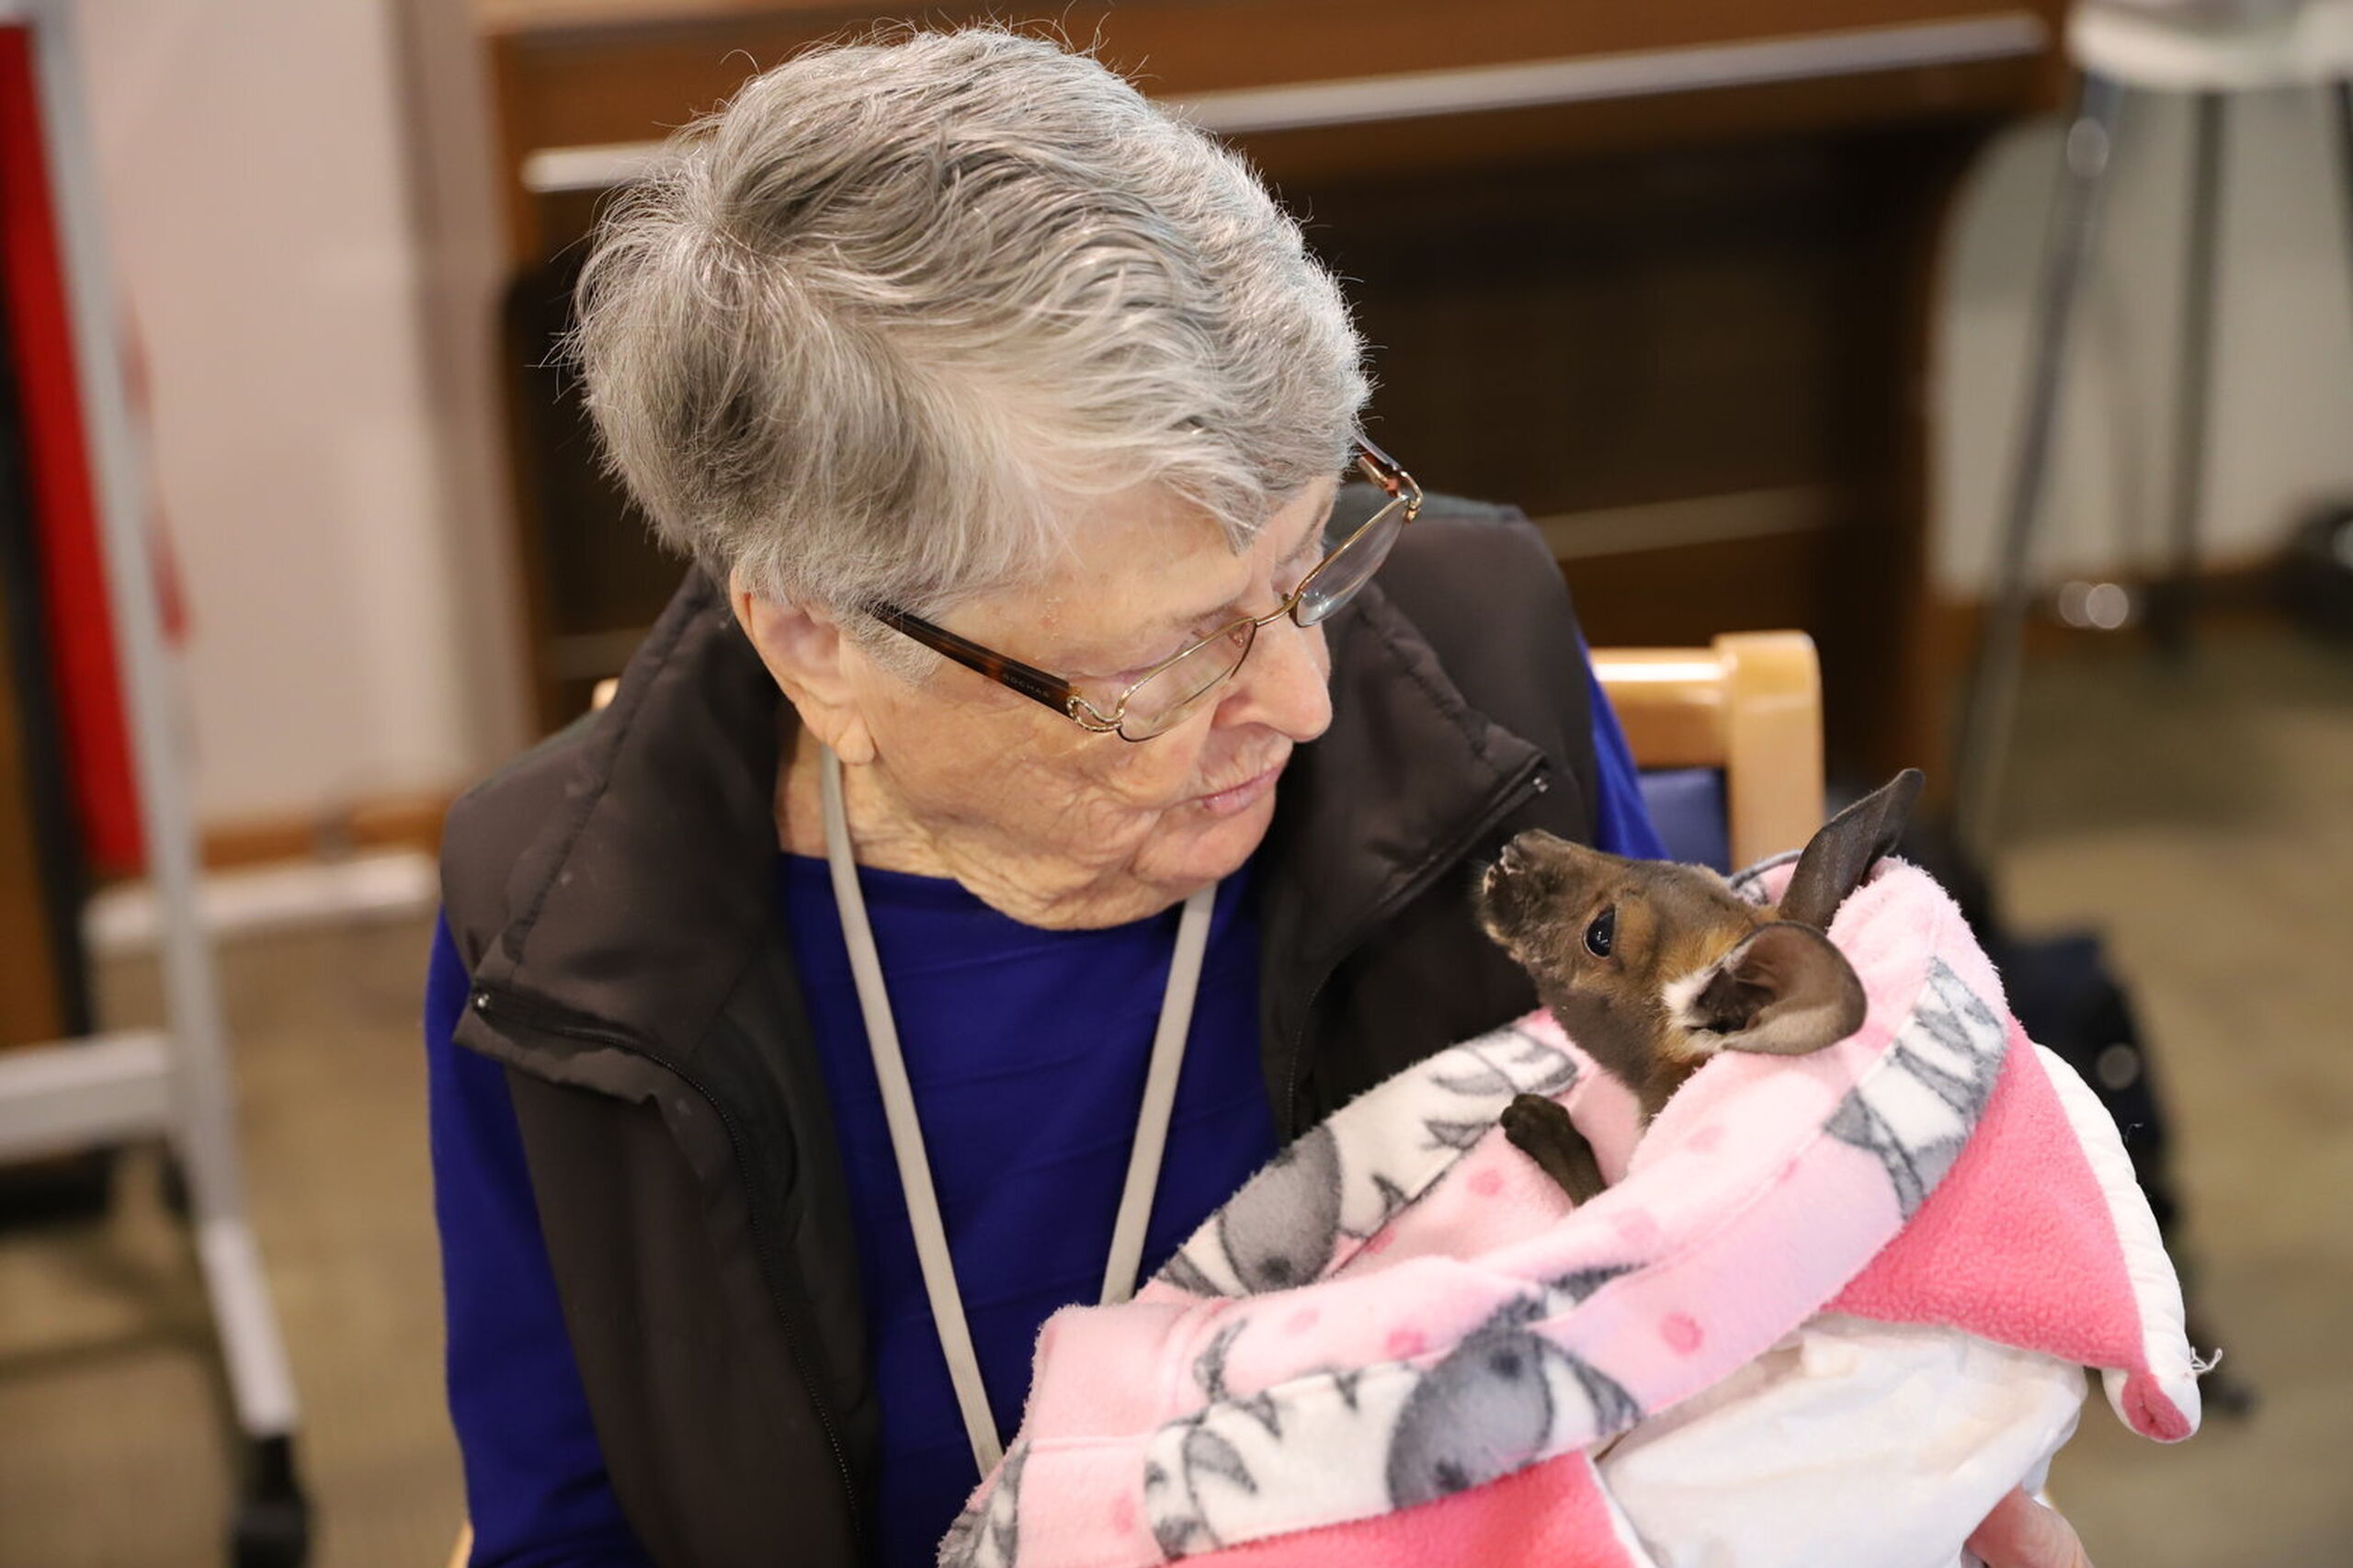 Rescue joeys bring joy to Yallambee Residential Care residents